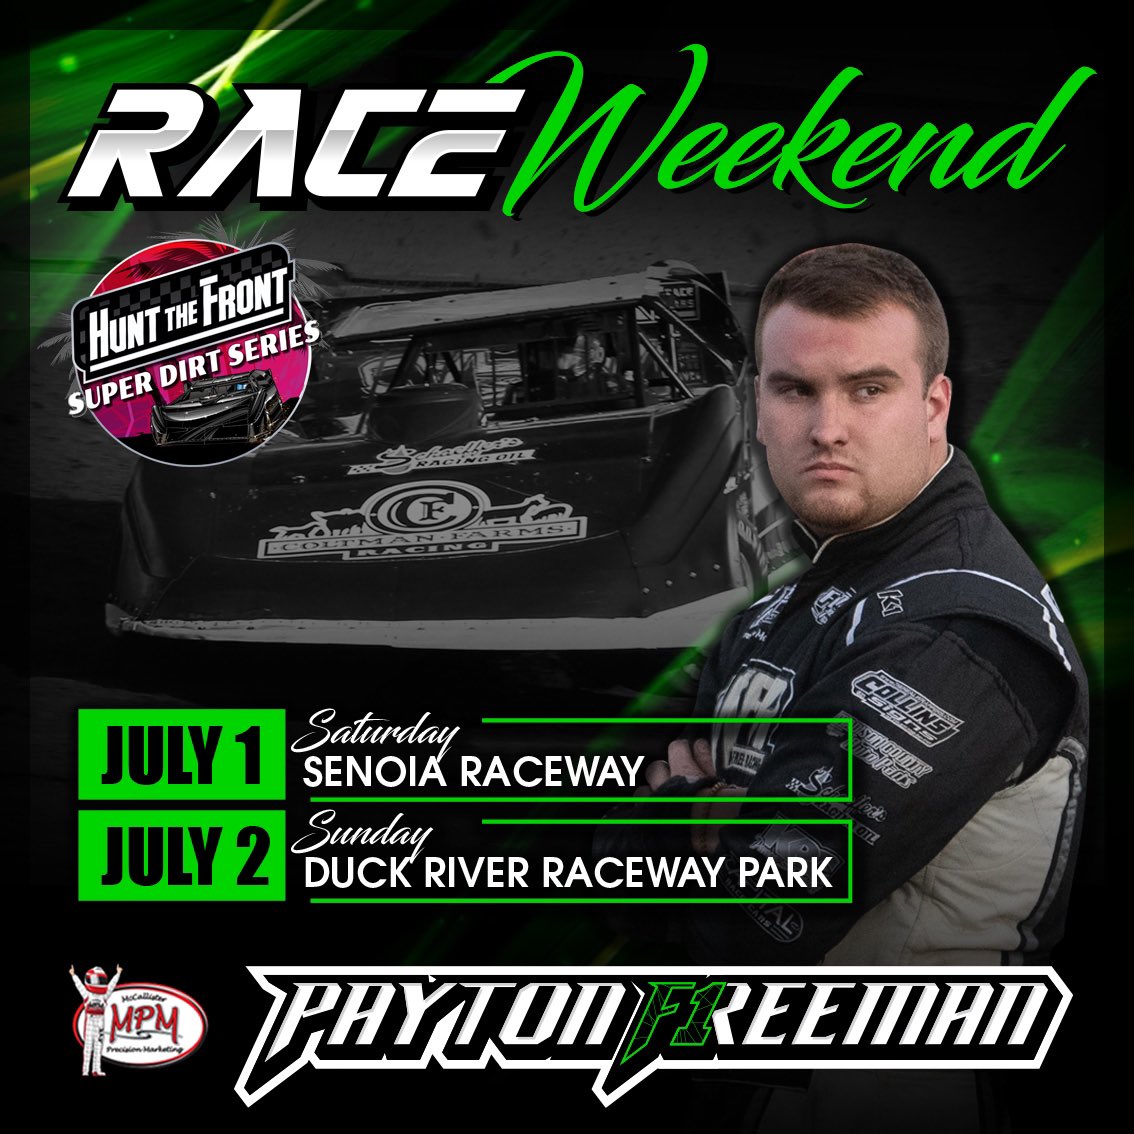 RACE Weekend starts tonight for Payton and team. 🏁 @HuntTheFrontSDS 📅 Saturday and Sunday July, 1st & 2nd 📍 @SenoiaR (Saturday) 📍 Duck River Raceway Park (Sunday)